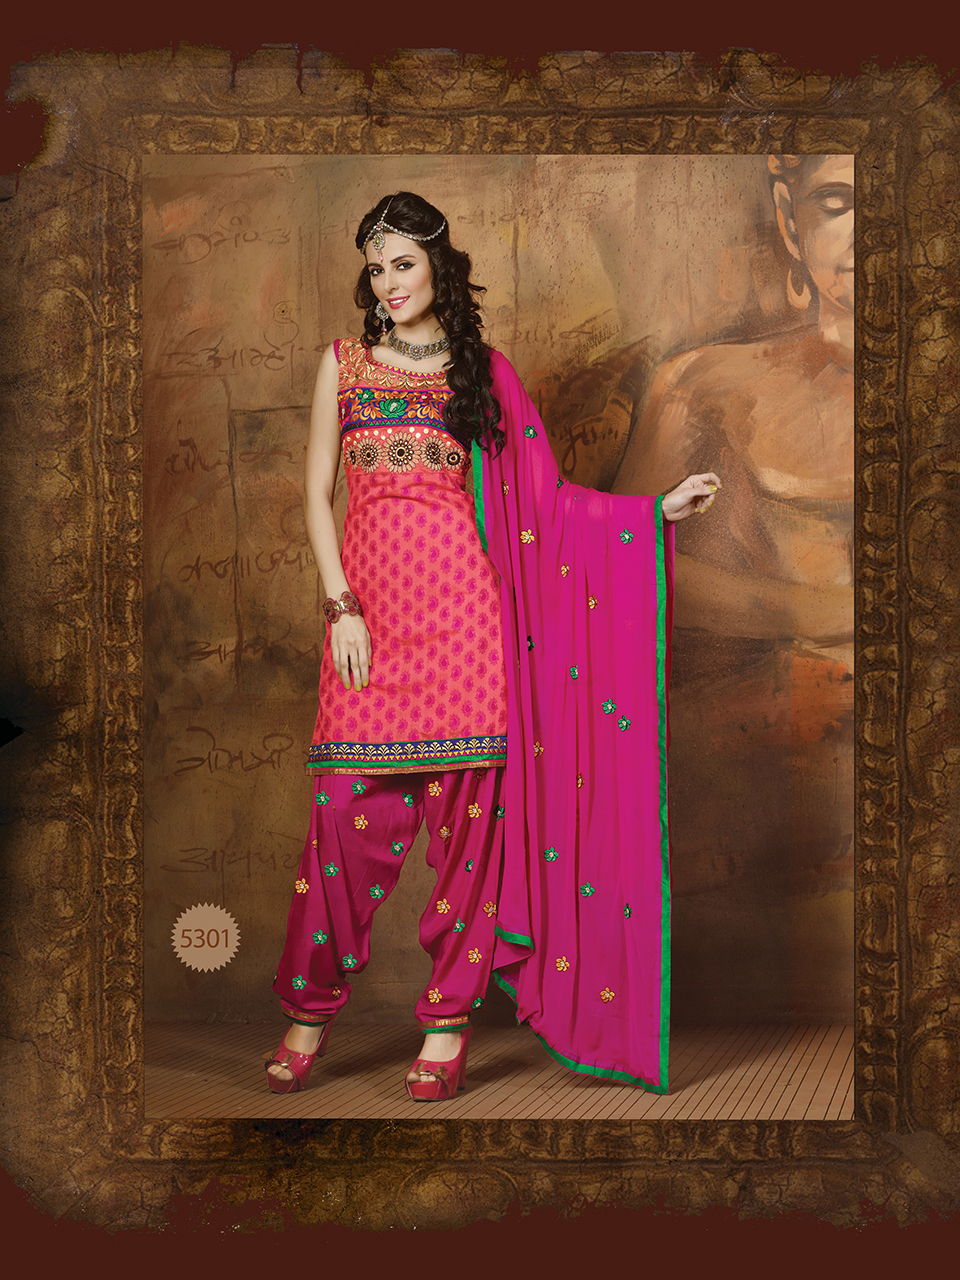 Patiala Salwar Kameez Online Shopping Exclusive Collection Of Indian 